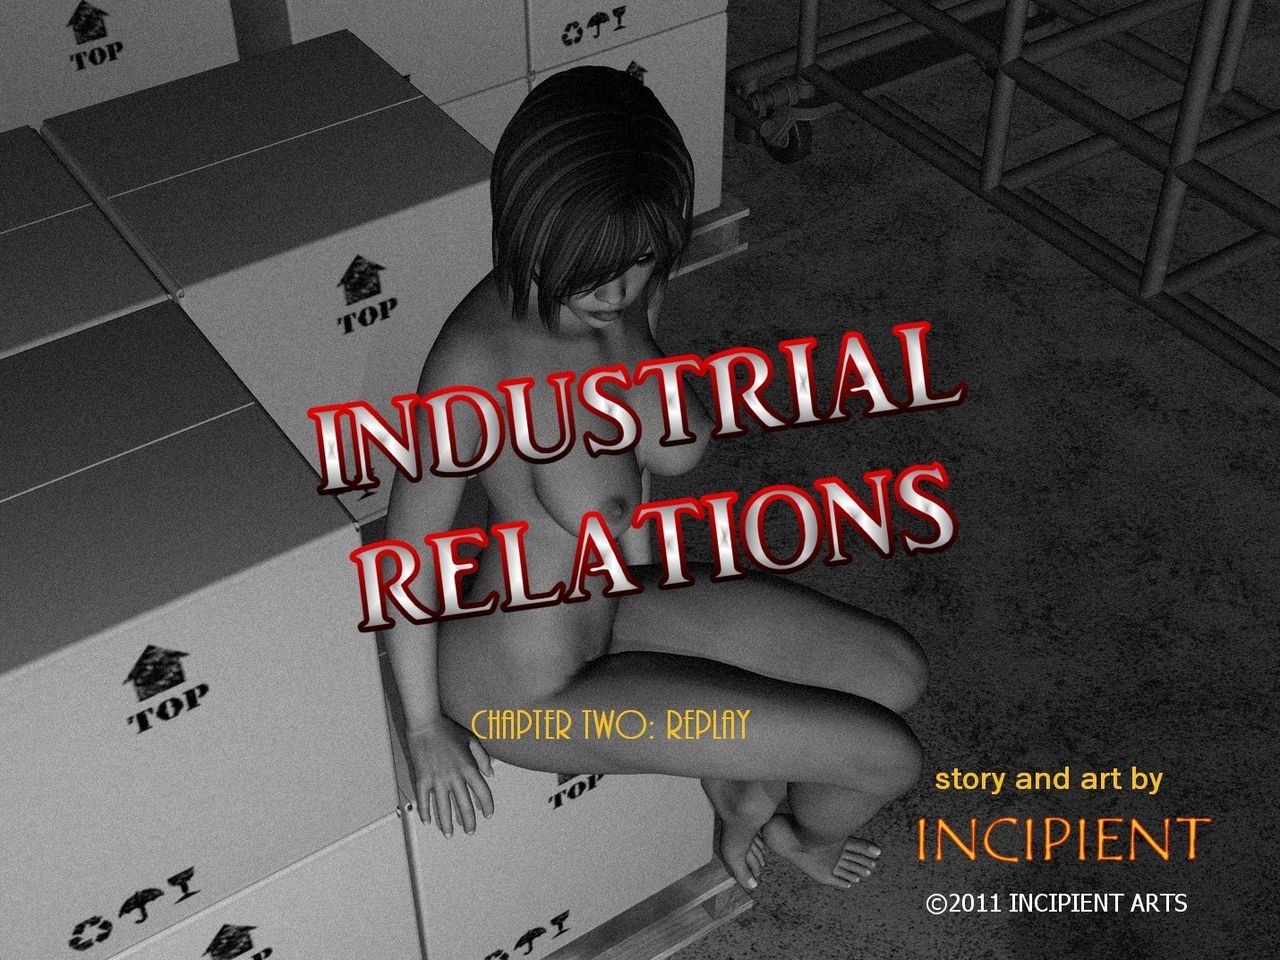 [Incipient] Industrial Relations Ch. 2: Replay [Thai ภาษาไทย] 0